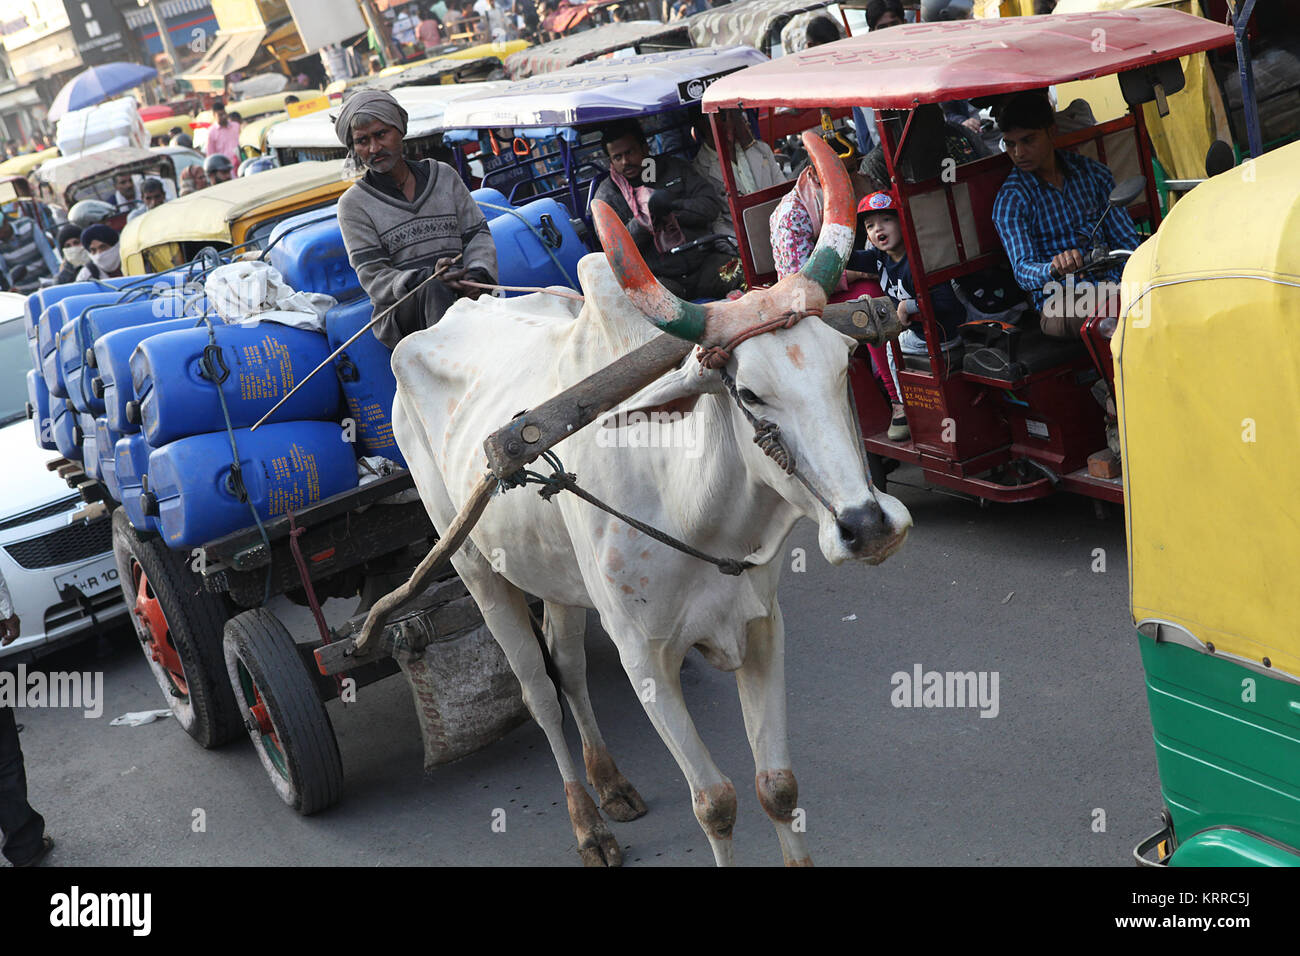 A bullock cart and driver in congested traffic in Chandni Chowk, New Delhi, India Stock Photo